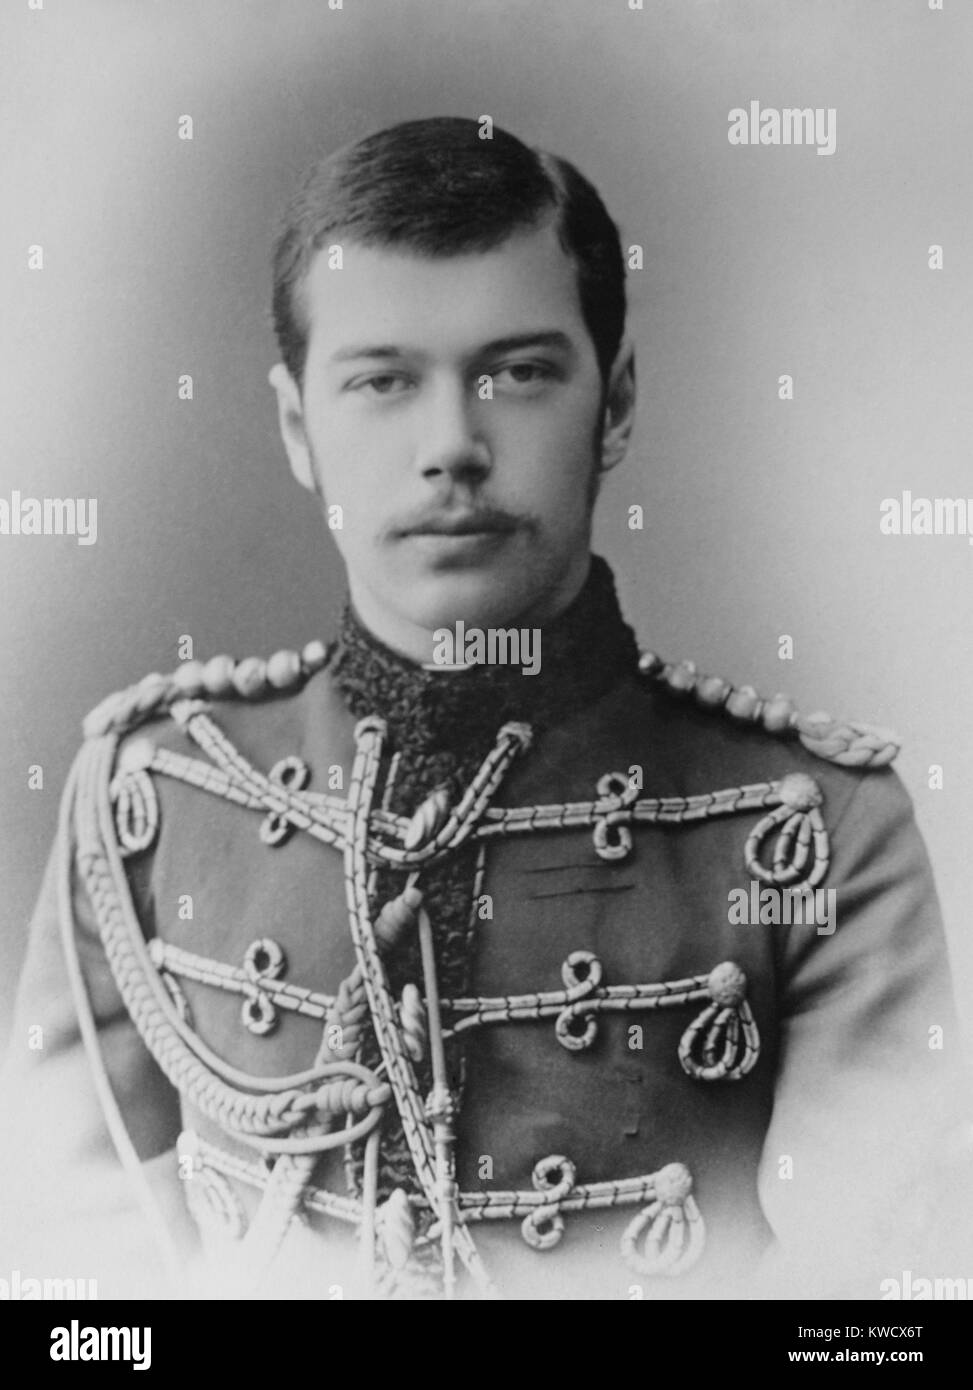 Czar Nicholas II of Russia in 1886, at age 18 (BSLOC 2017 2 4) Stock Photo